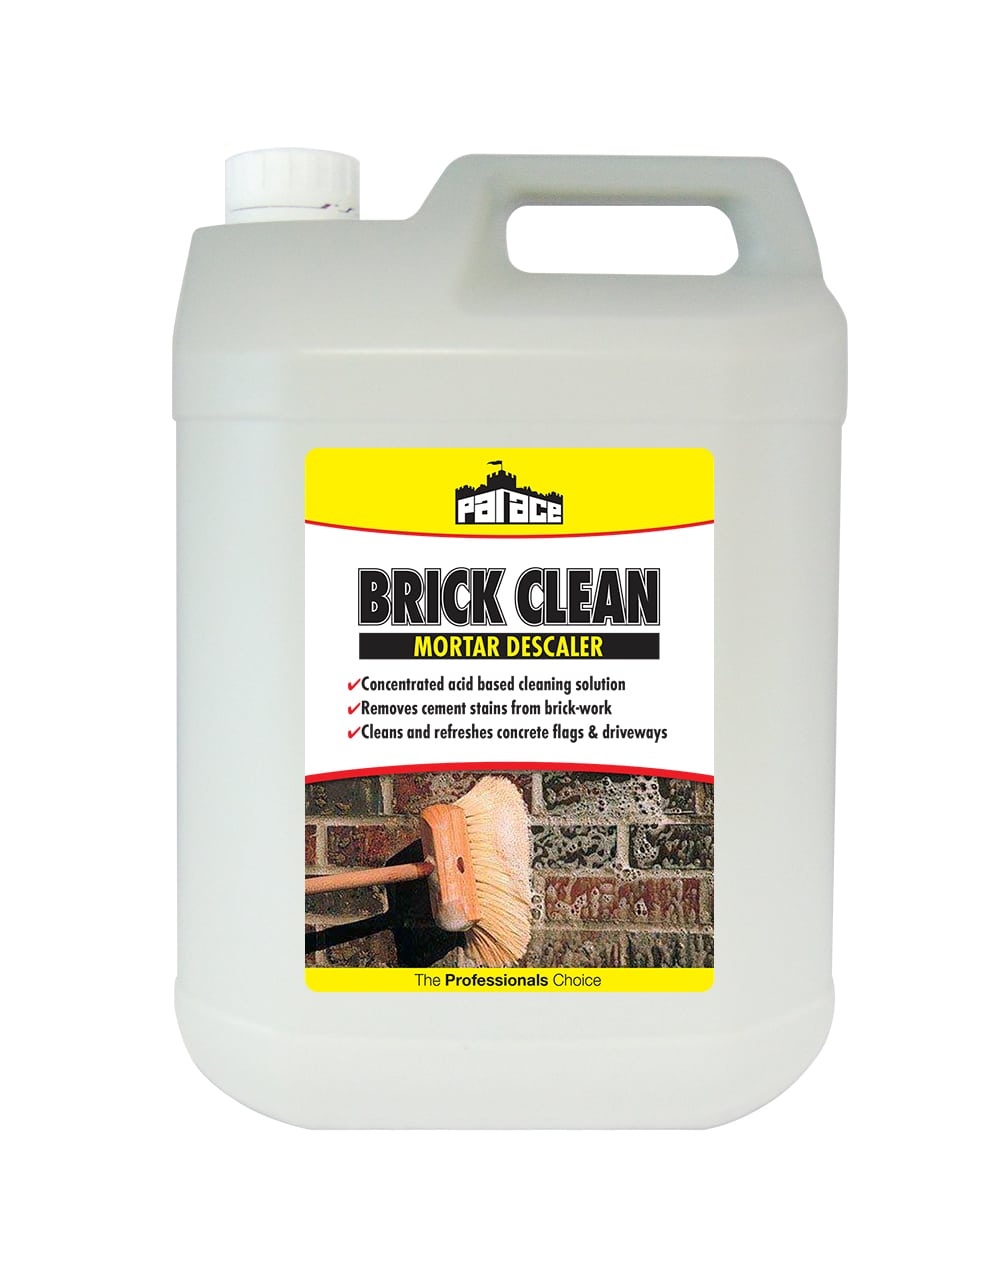 Palace Brick Cleaner